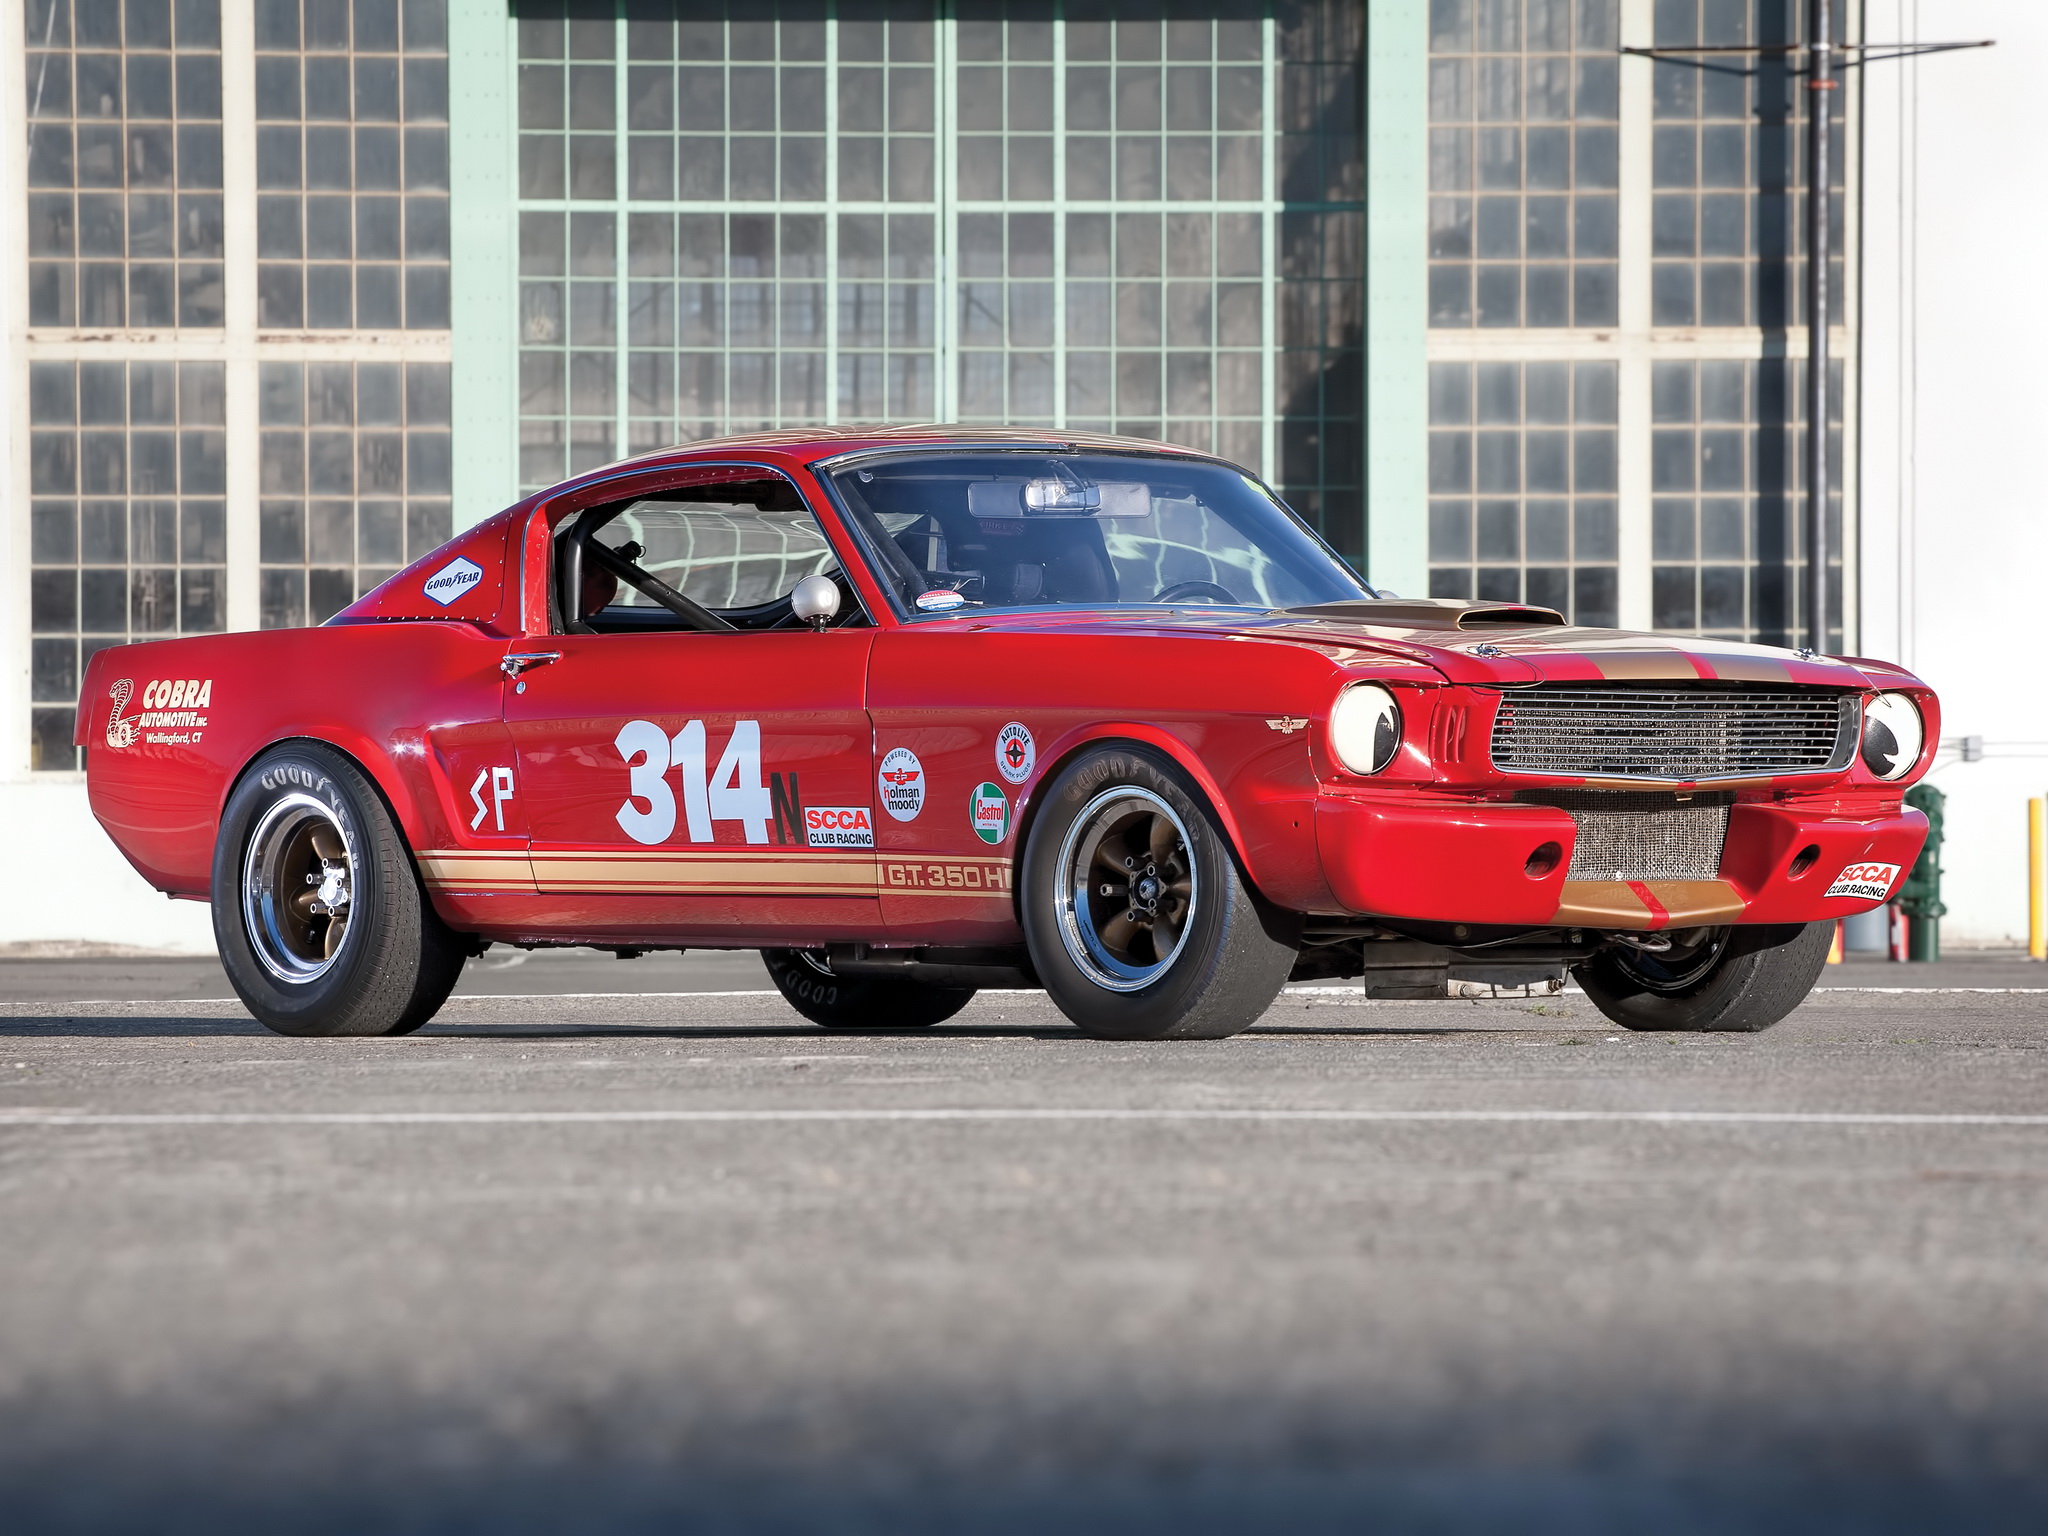 1966, Shelby, Gt350h, Scca, B production, Ford, Mustang, Race, Racing, Hot, Rod, Rods, Muscle Wallpaper